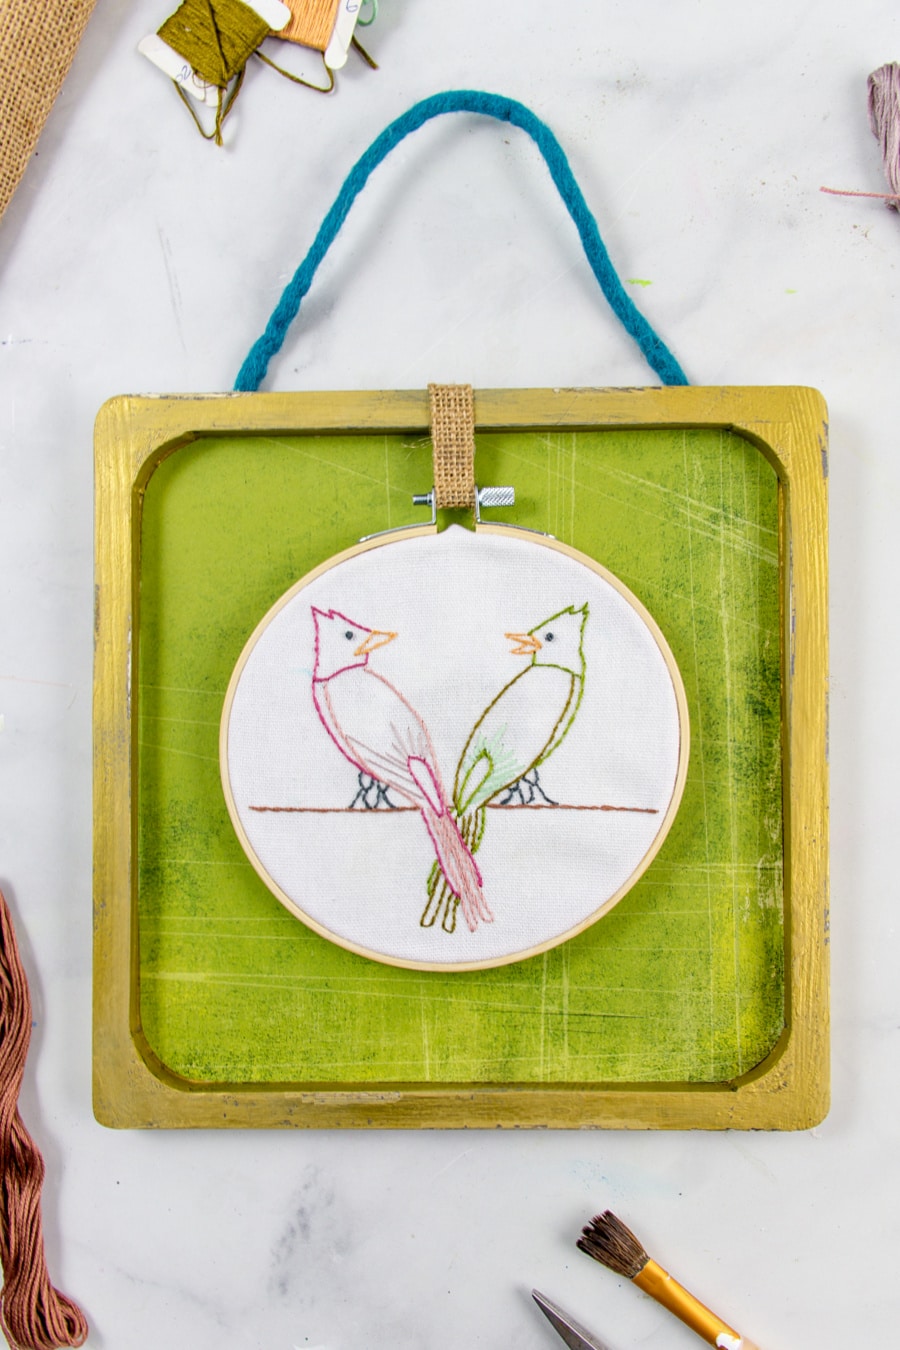 lovebirds embroidery project in a box frame